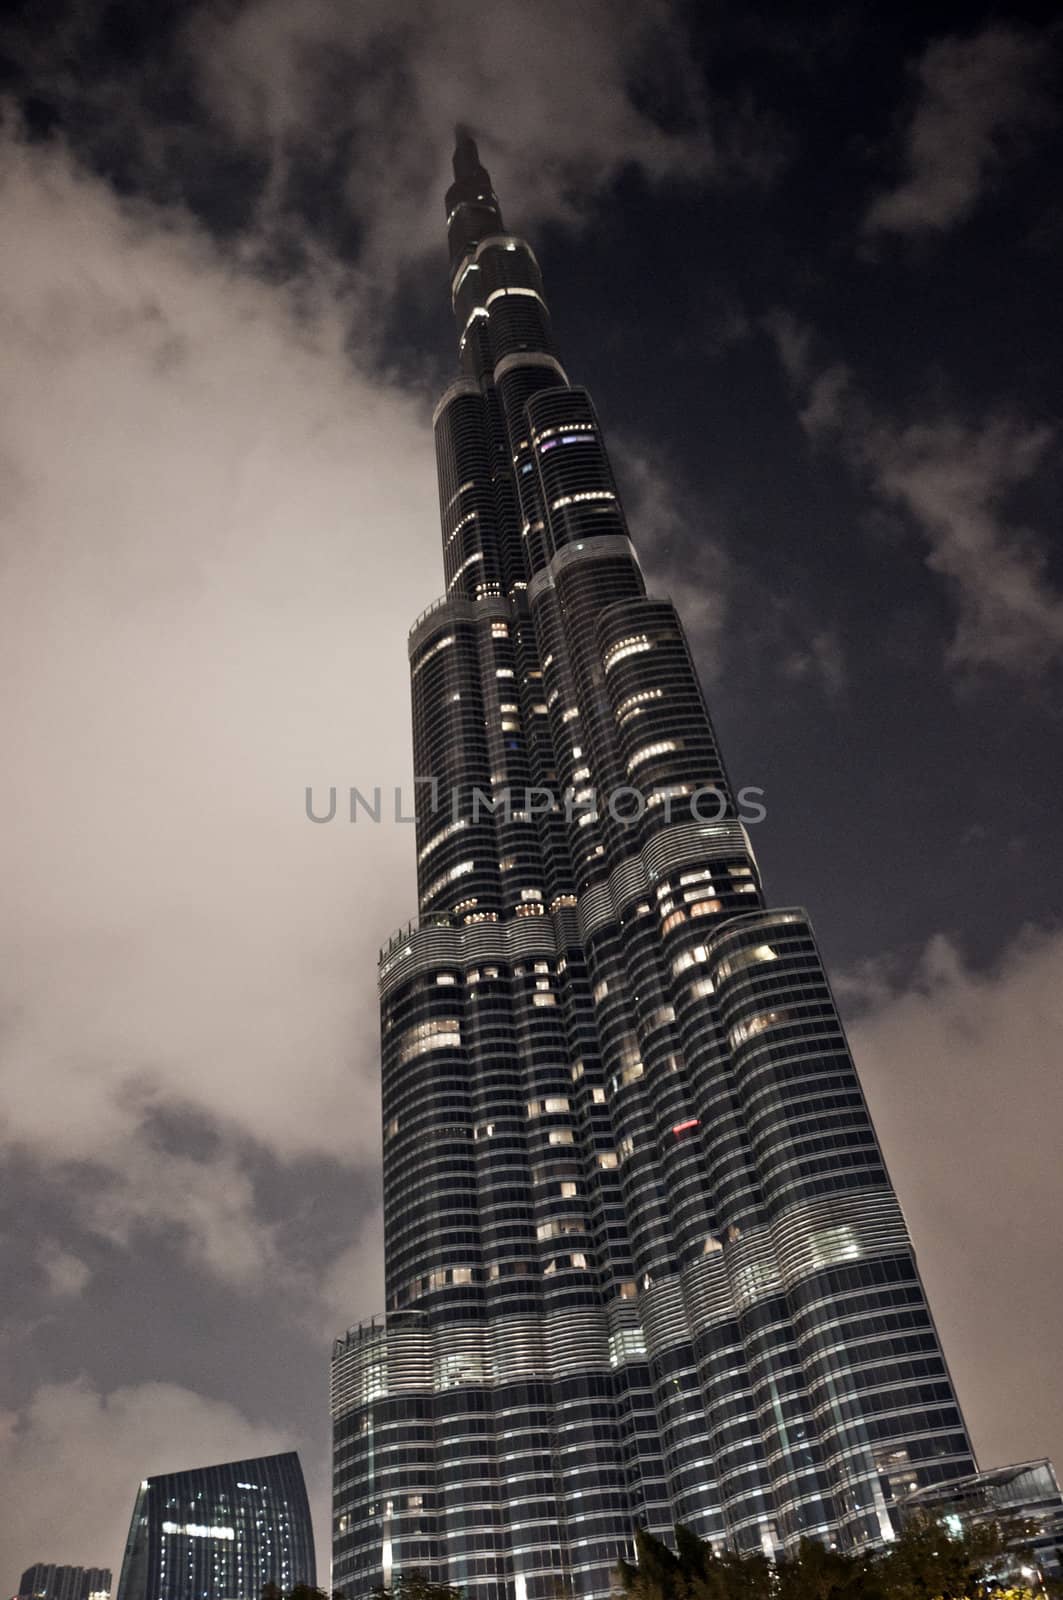 An amazing piece of architecture, the tallest building in the world, Burj Khalifa and the surroundings in Dubai, UAE